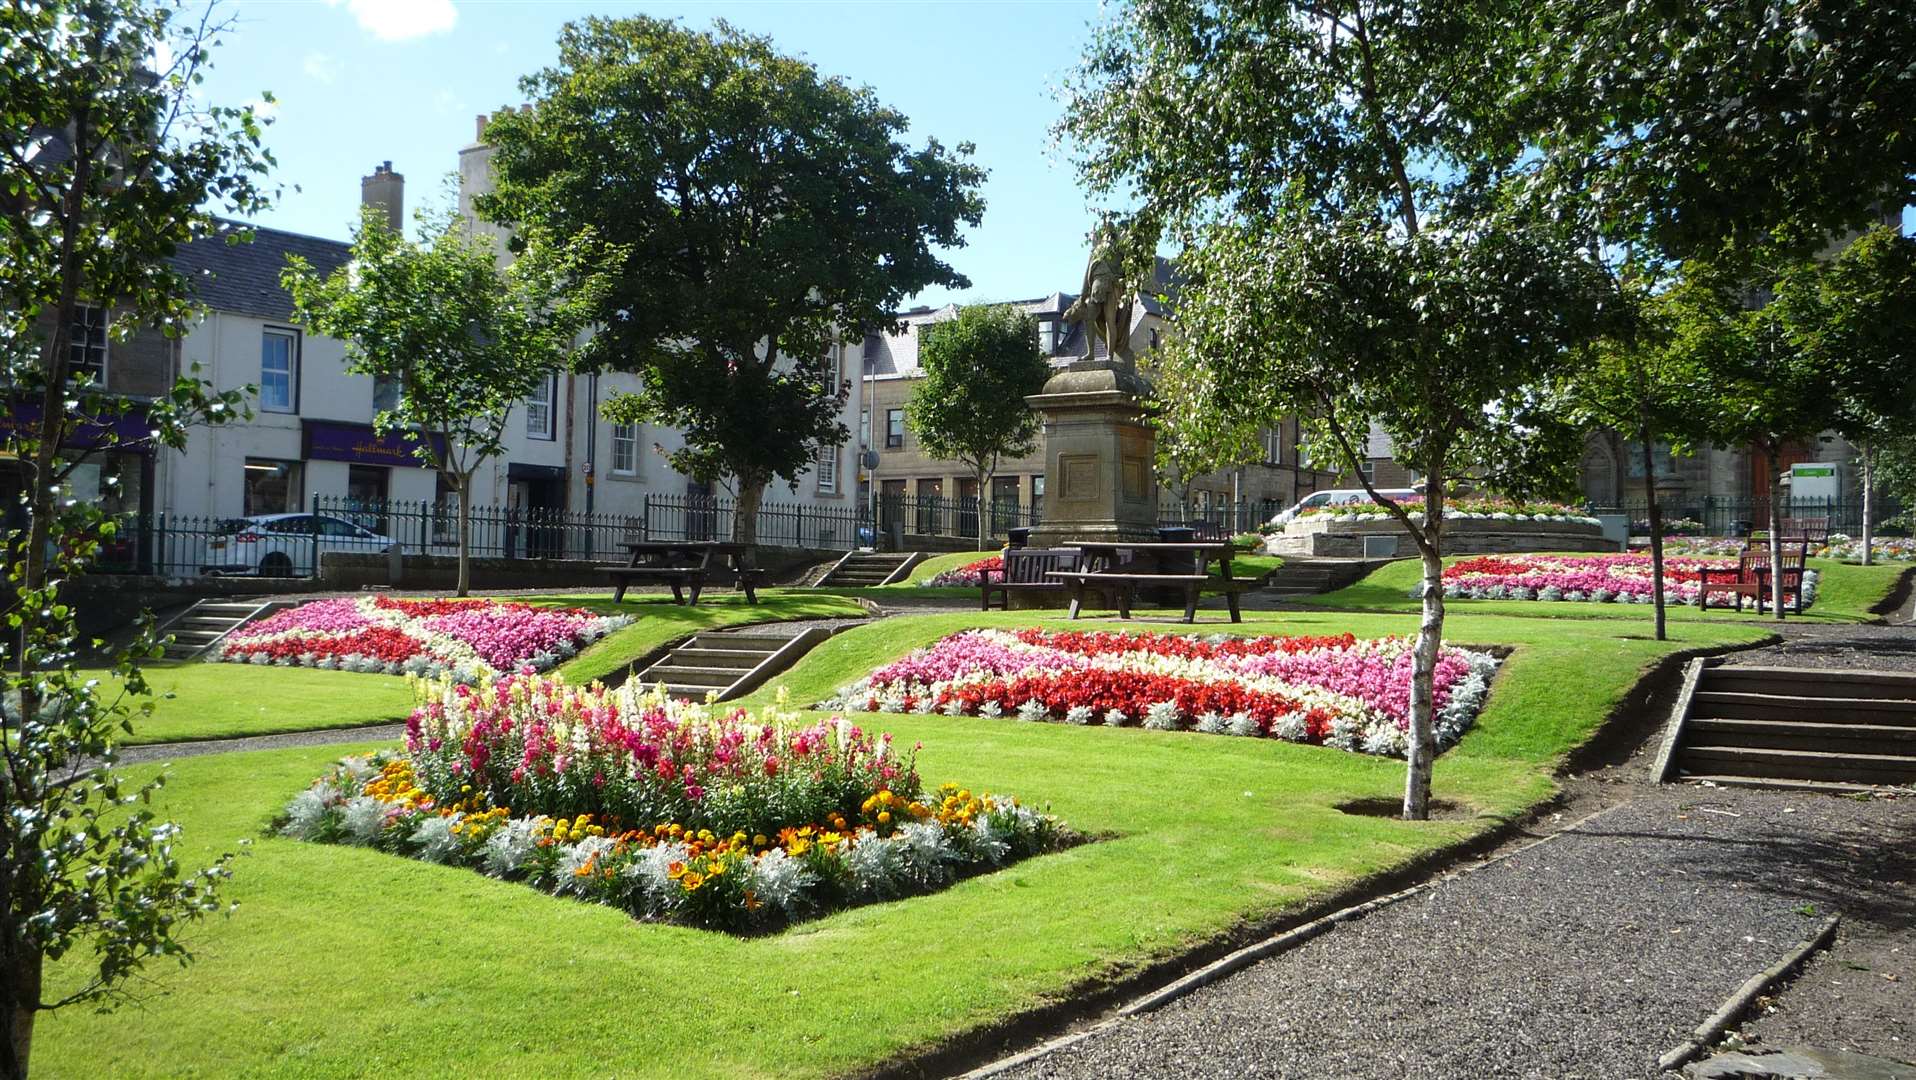 Sir John's Square is set to be part of Thurso's common good assets. Picture: DGS